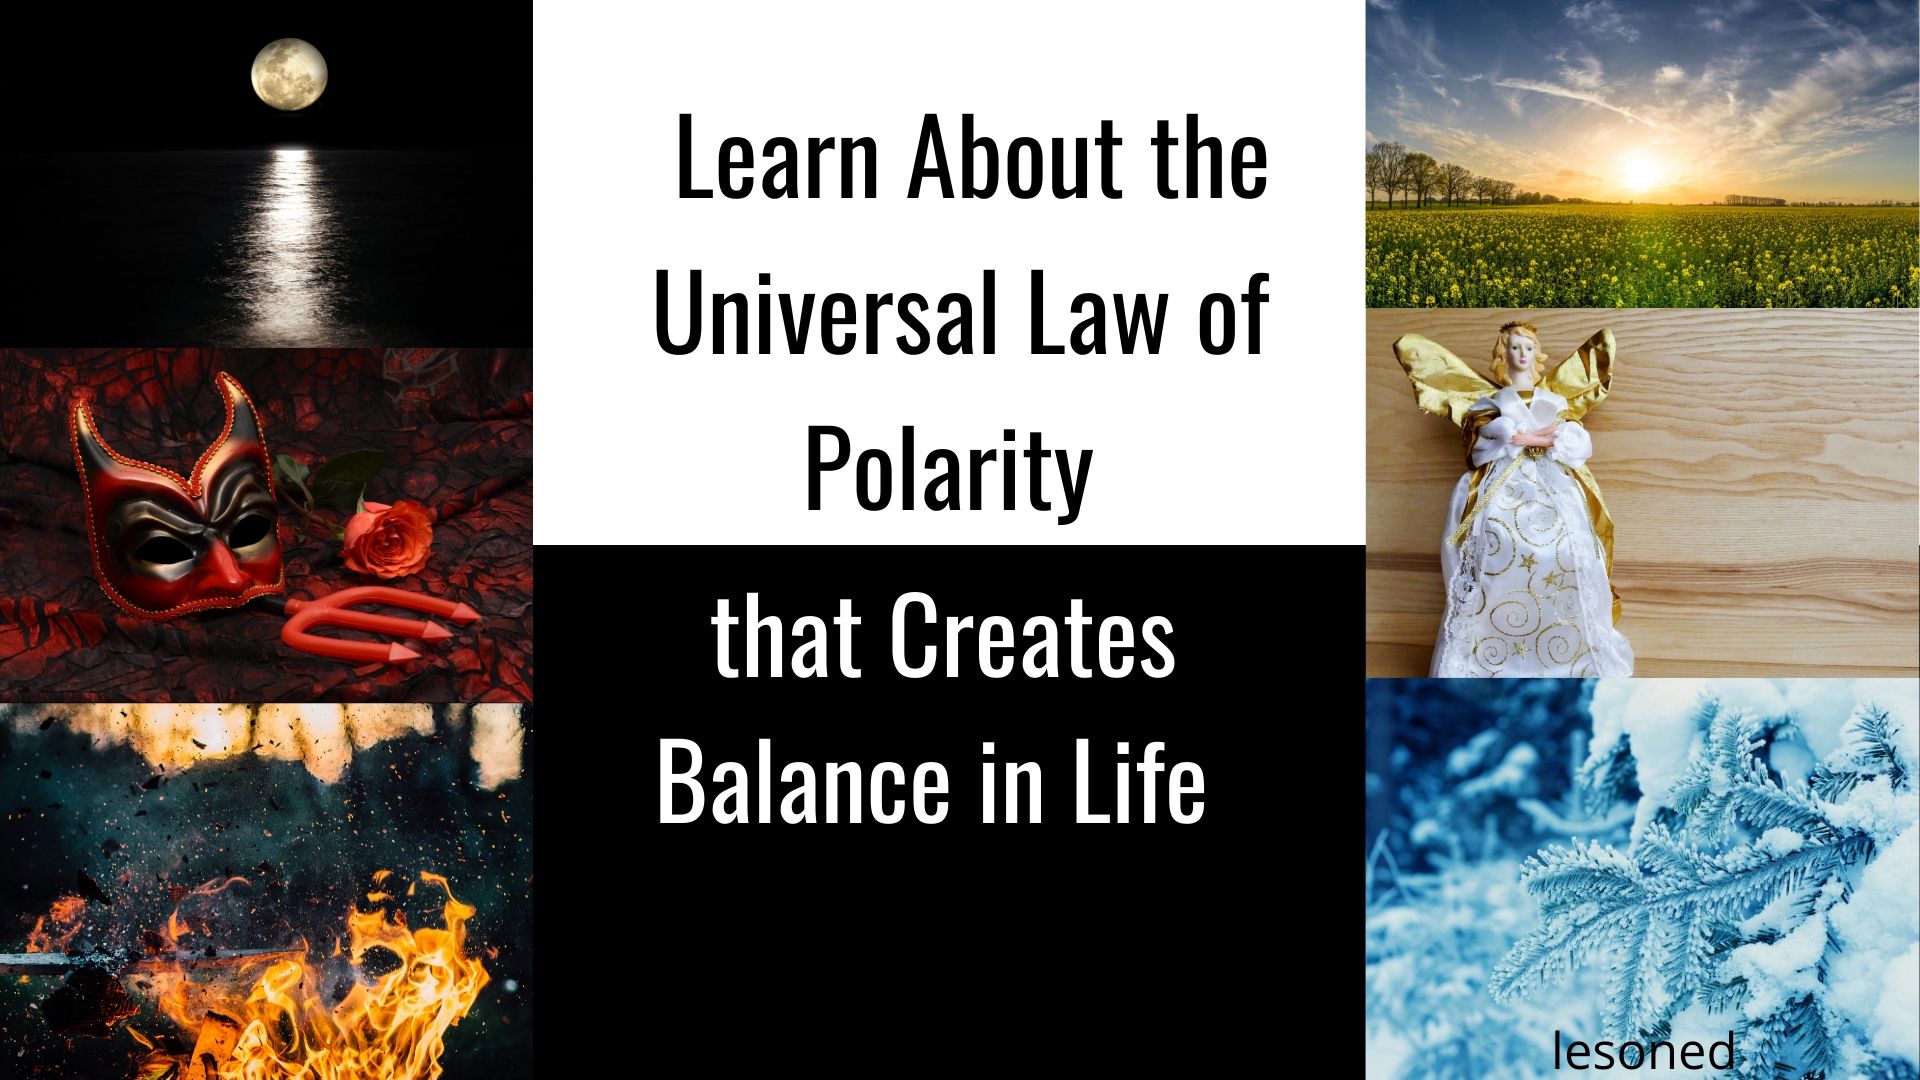 Learn About the Universal Law of Polarity that Creates Balance in Life